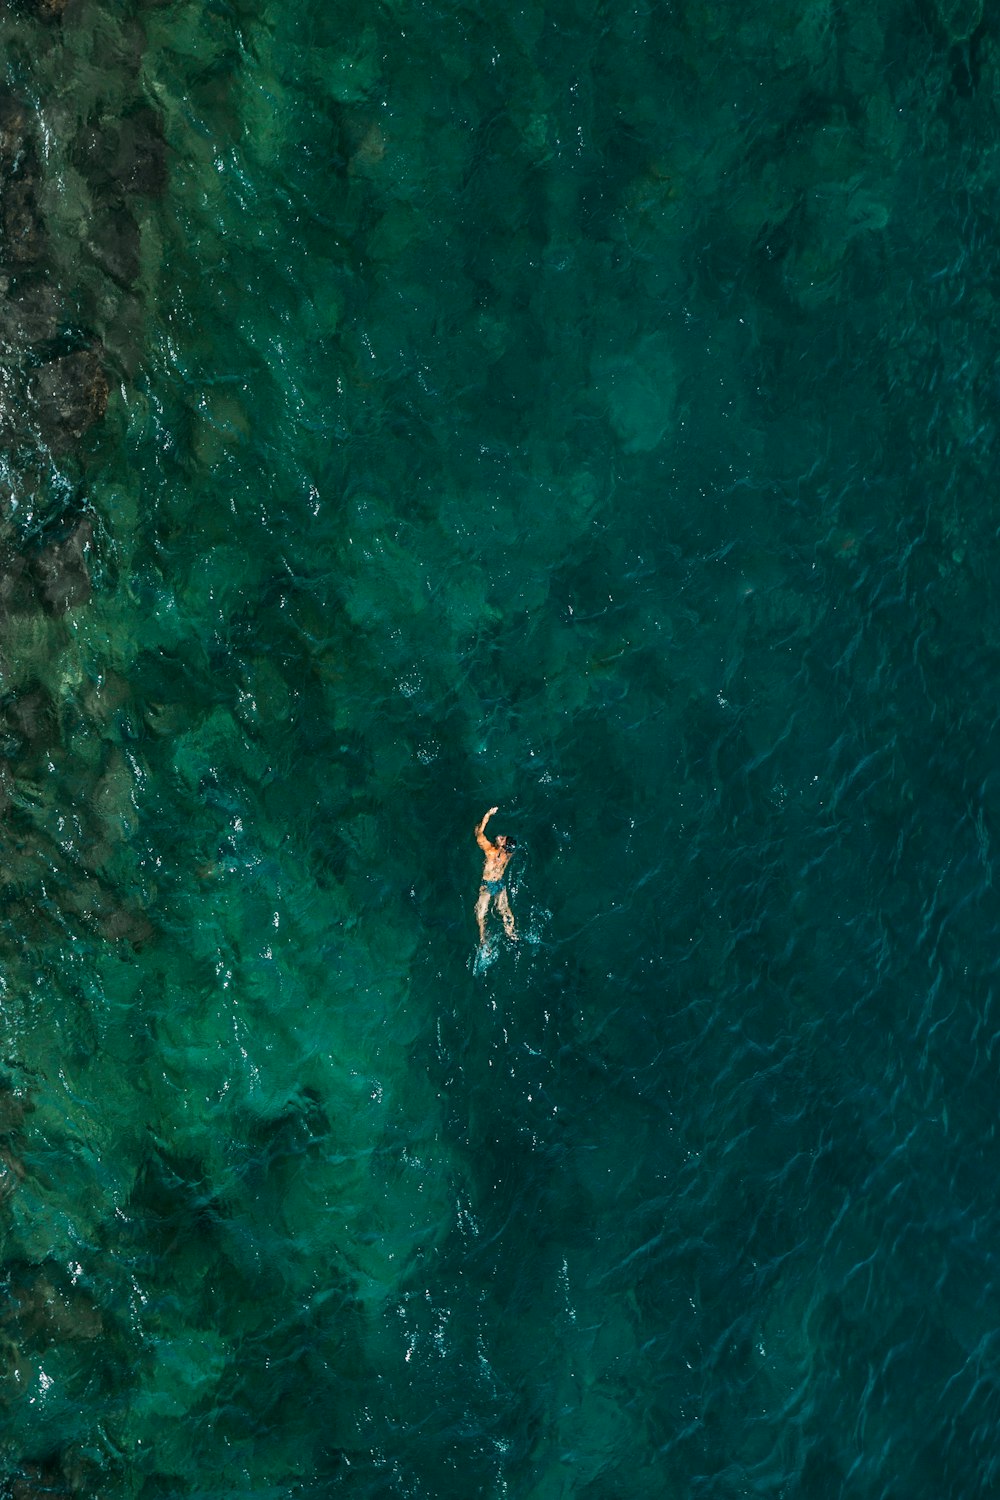 bird's-eye photography of person on body of water